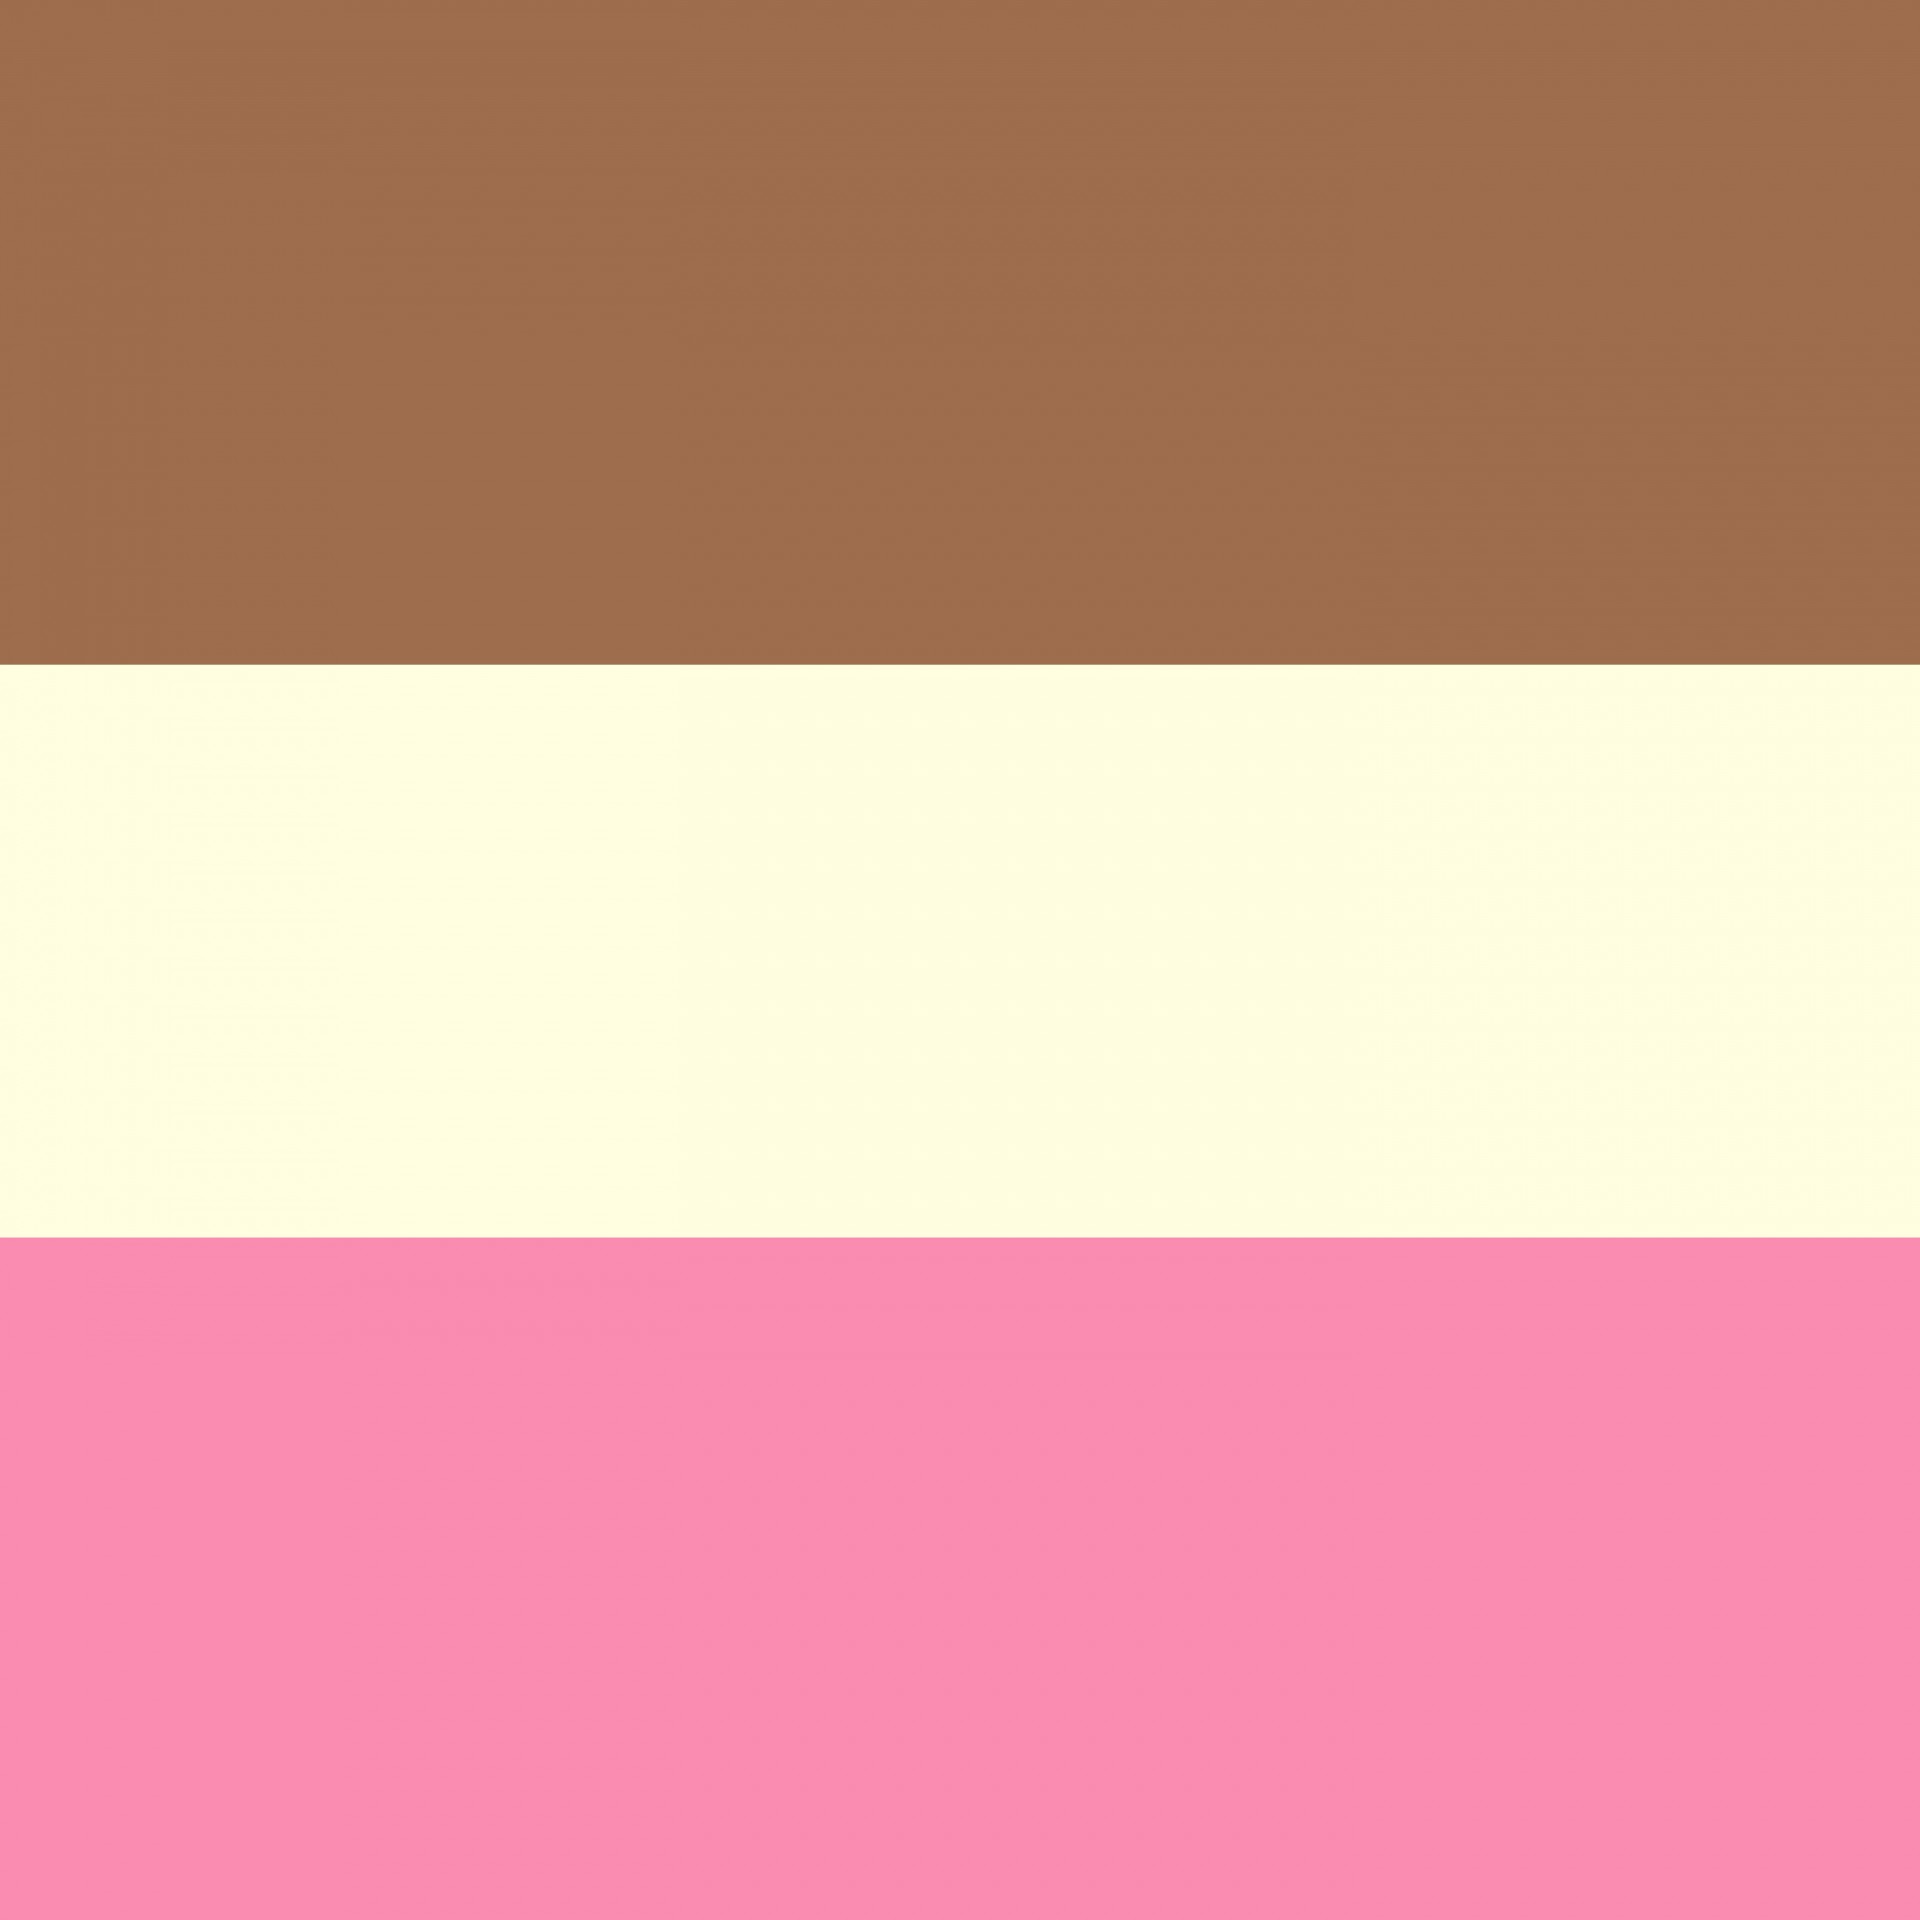 Pink, cream and chocolate brown neapolitan ice cream colors stripes